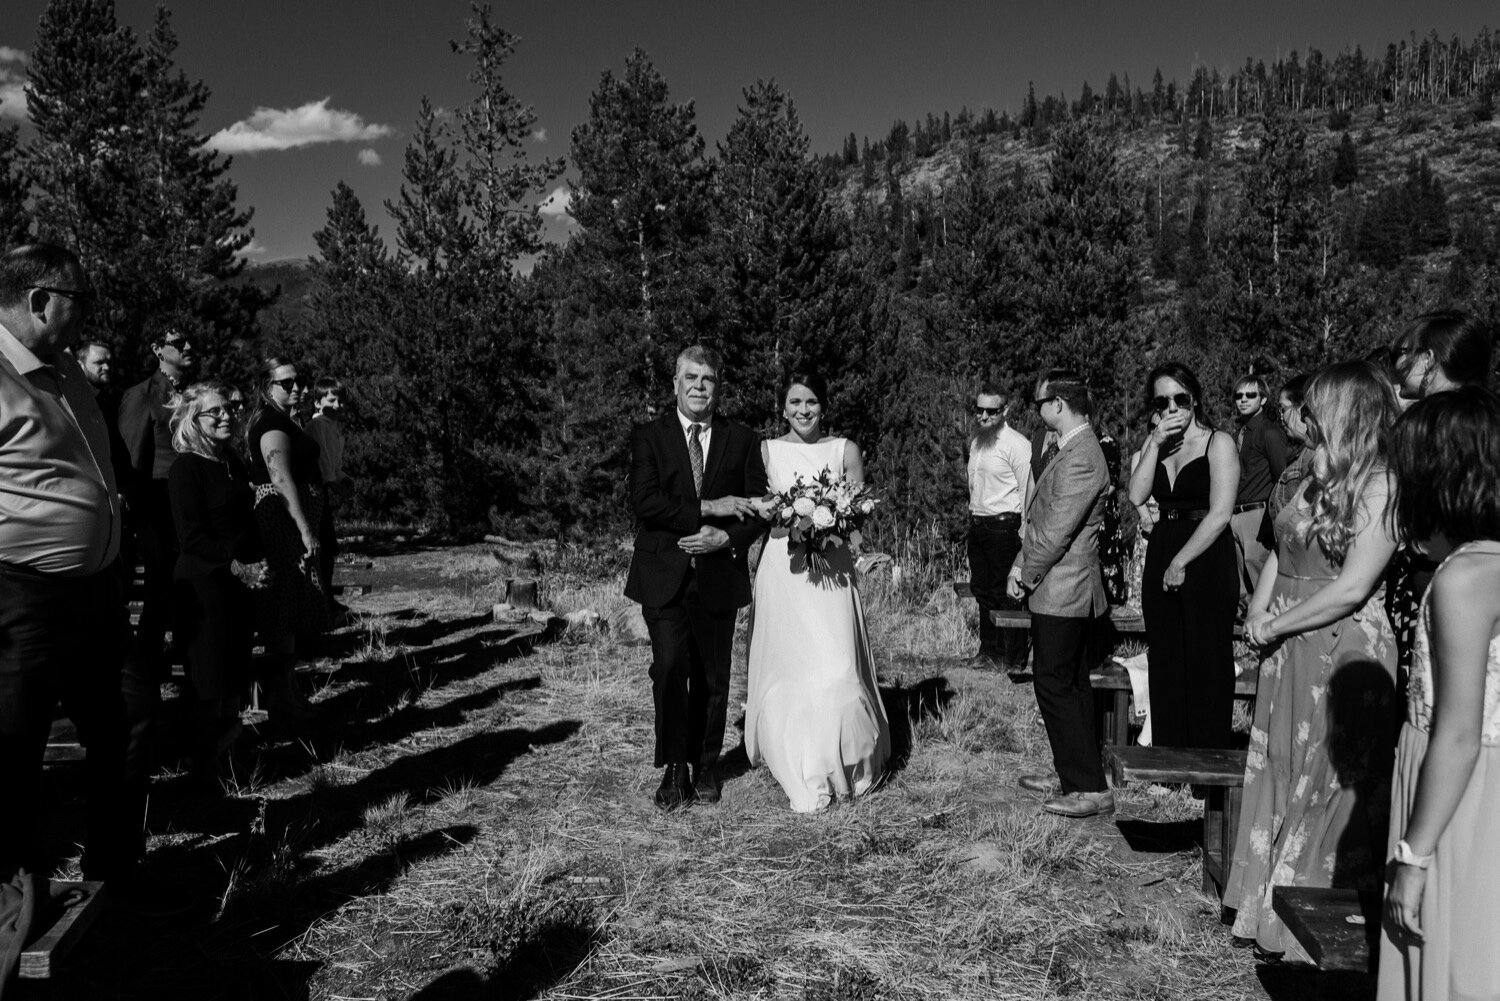  Bride and father walking down the aisle, Windy Point Campground Wedding Colorado, Dillon Colorado Wedding, Colorado mountain wedding, Dillon Colorado Wedding Photographer, Colorado Wedding Photographer, Colorado mountain wedding venues, Colorado cam